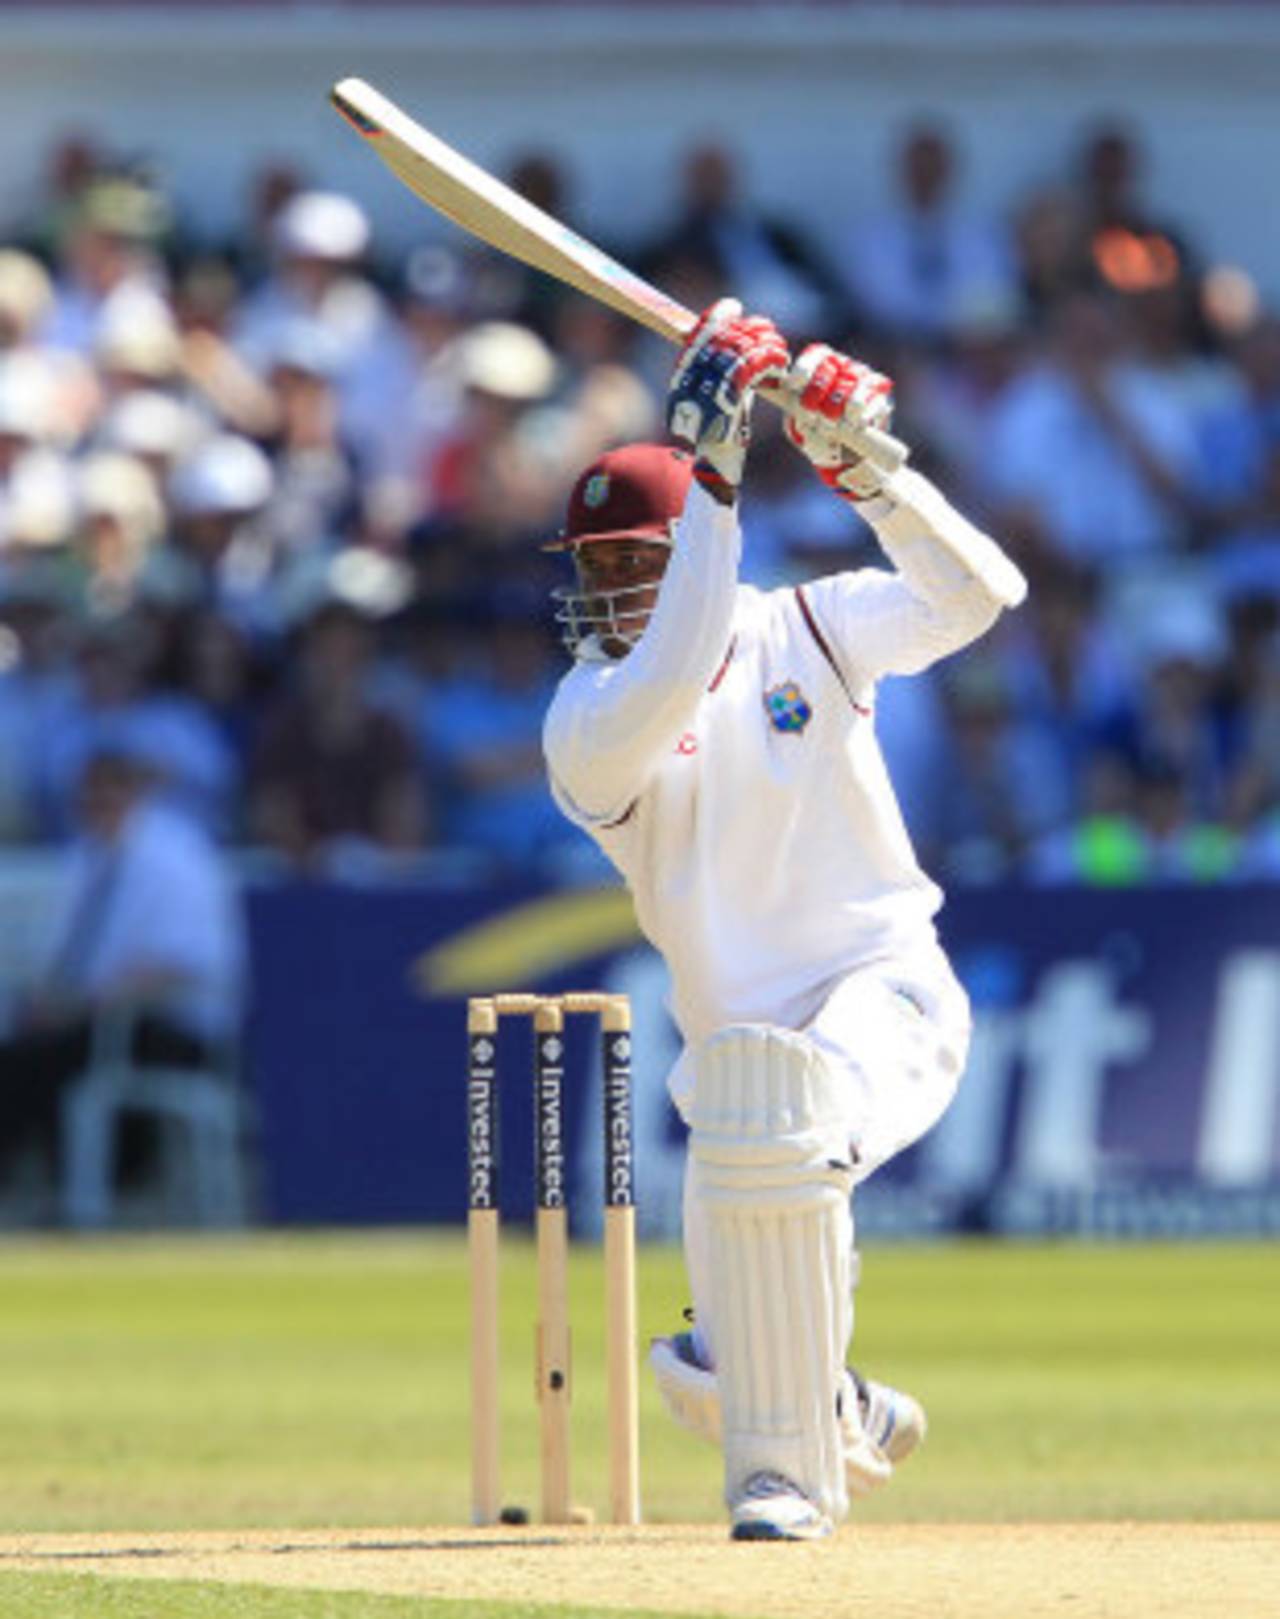 Marlon Samuels played another mature innings, England v West Indies, 2nd Test, Trent Bridge, 1st day, May 25, 2012